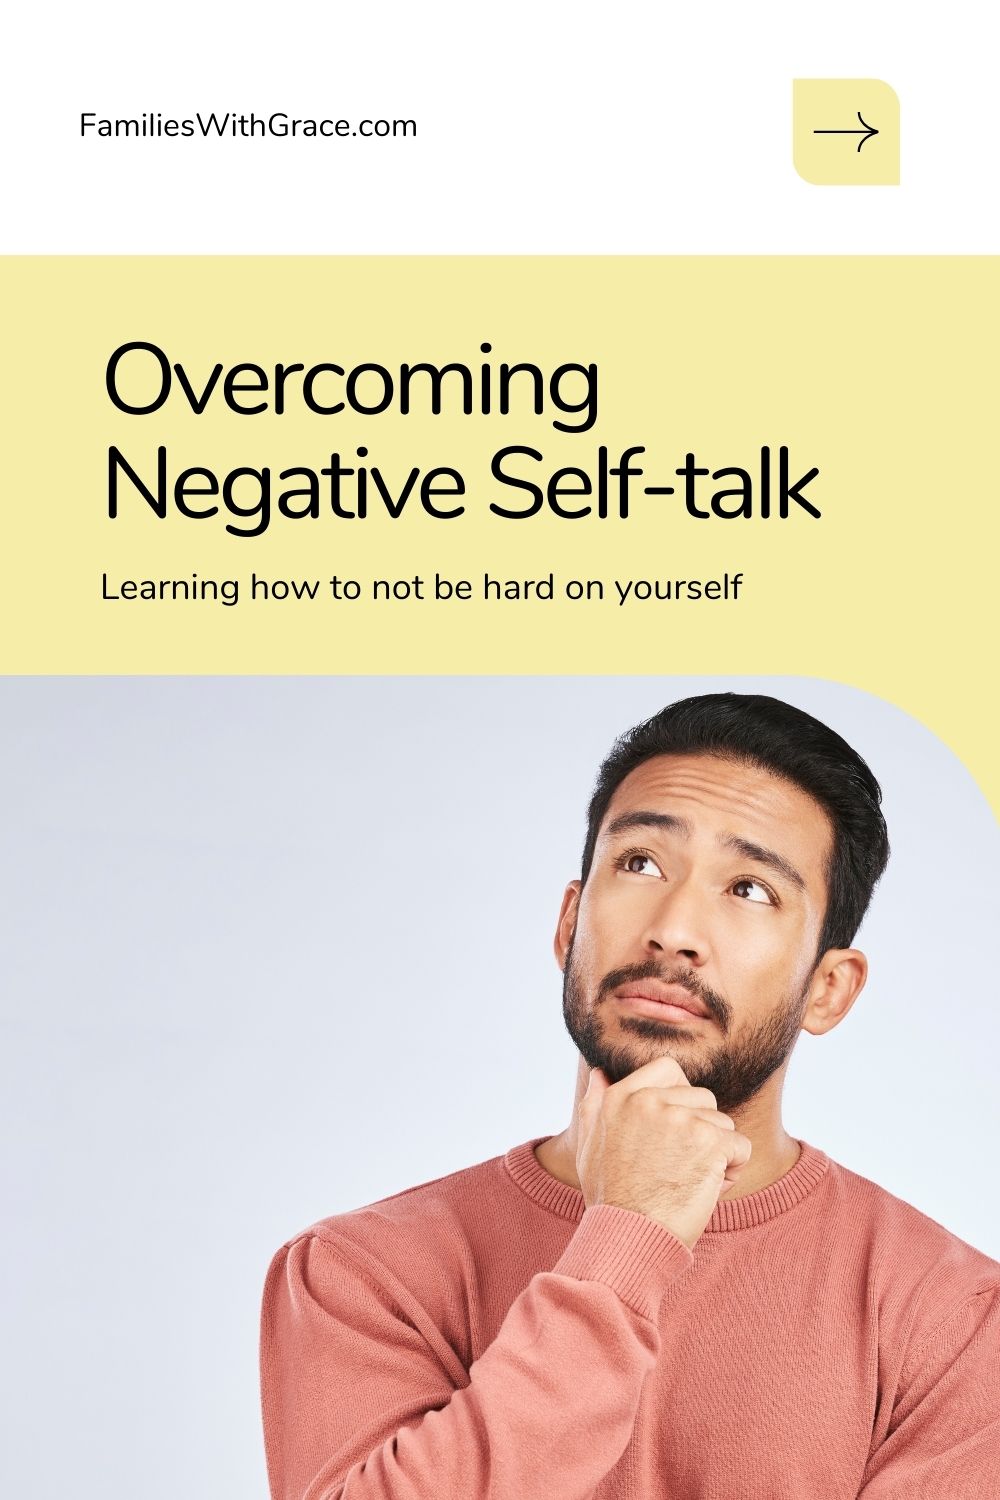 Learning how to not be hard on yourself